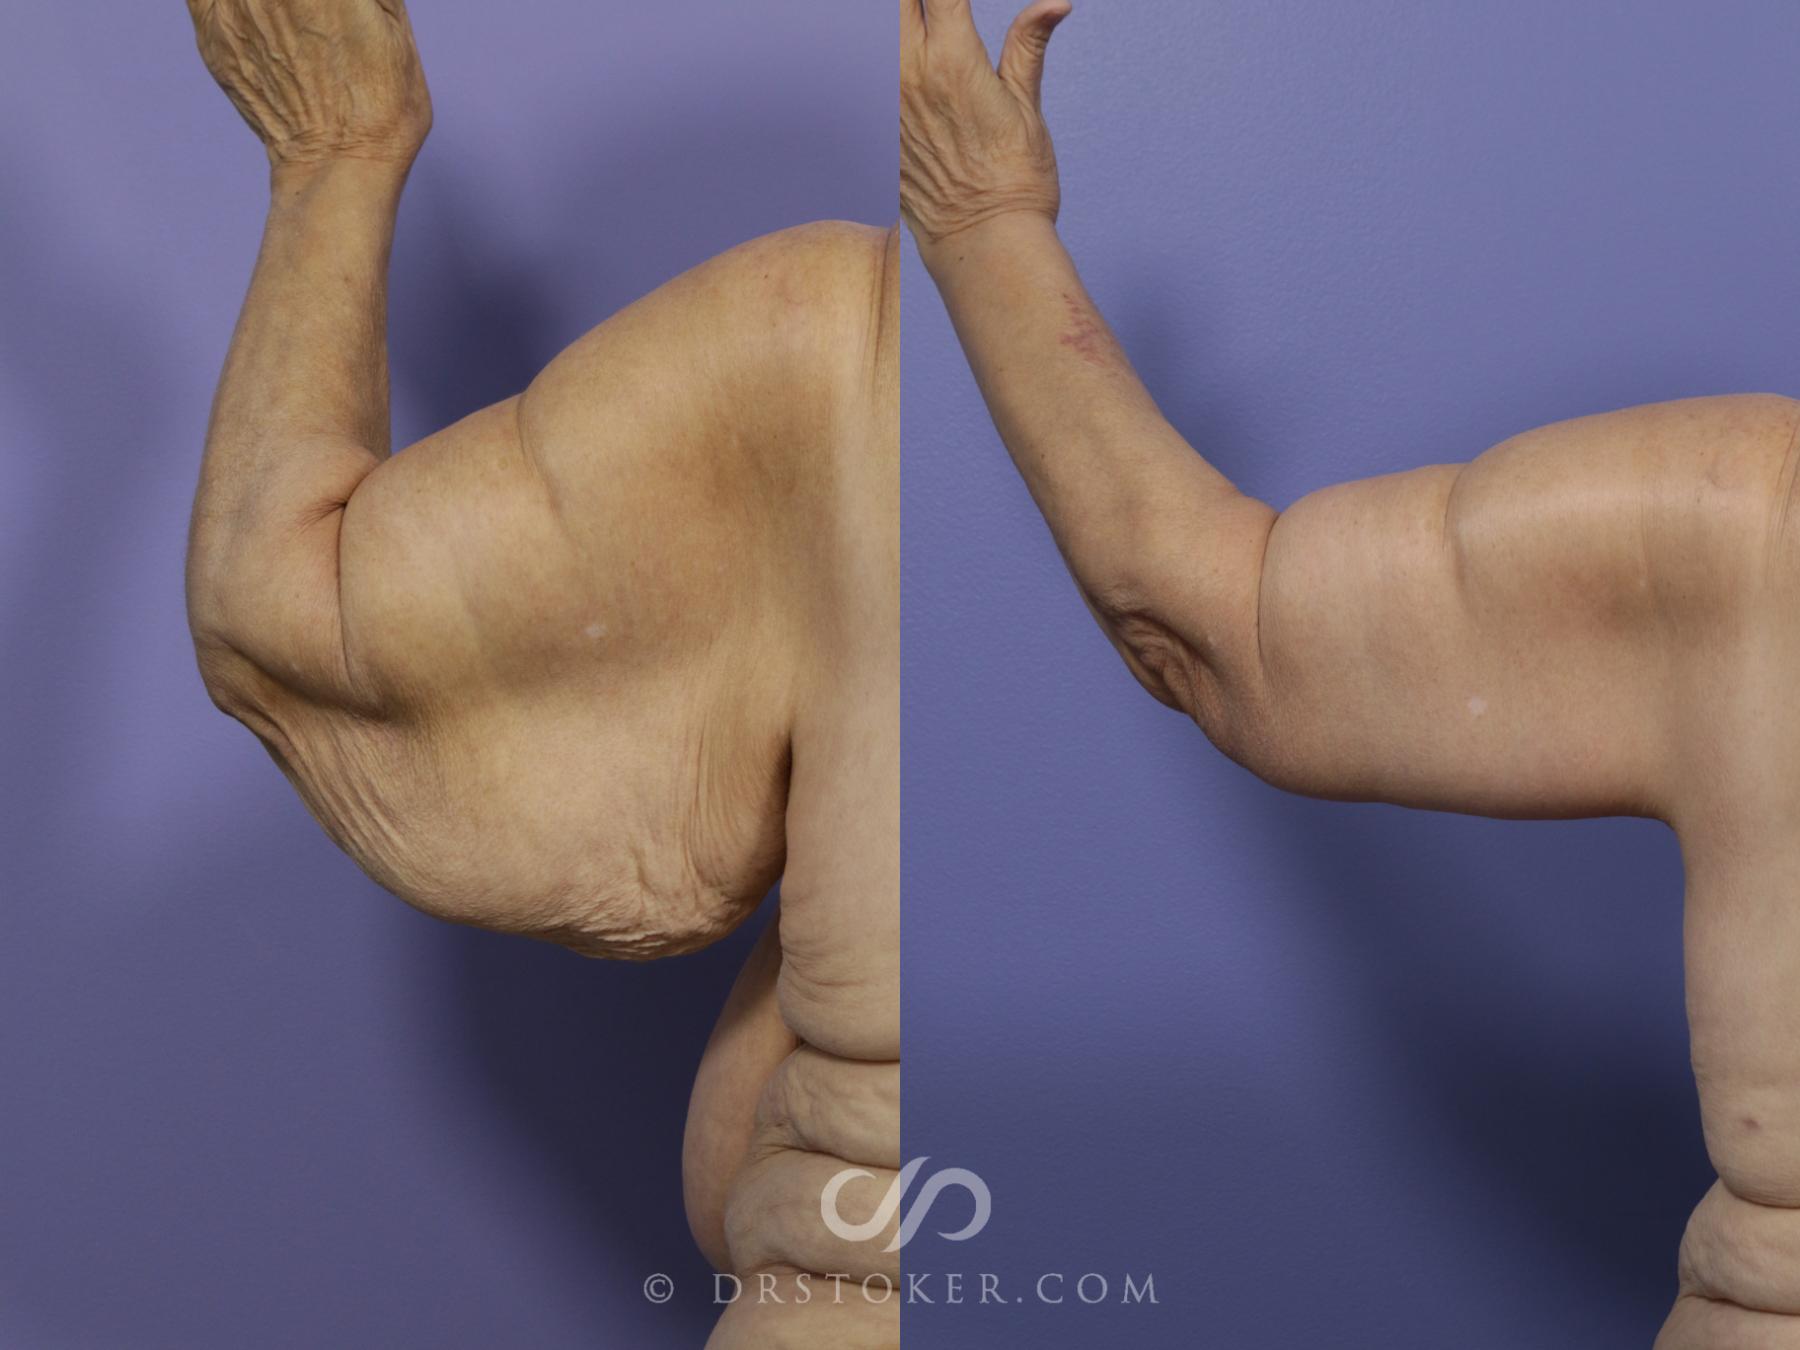 A before and after view of a successful brachioplasty procedure